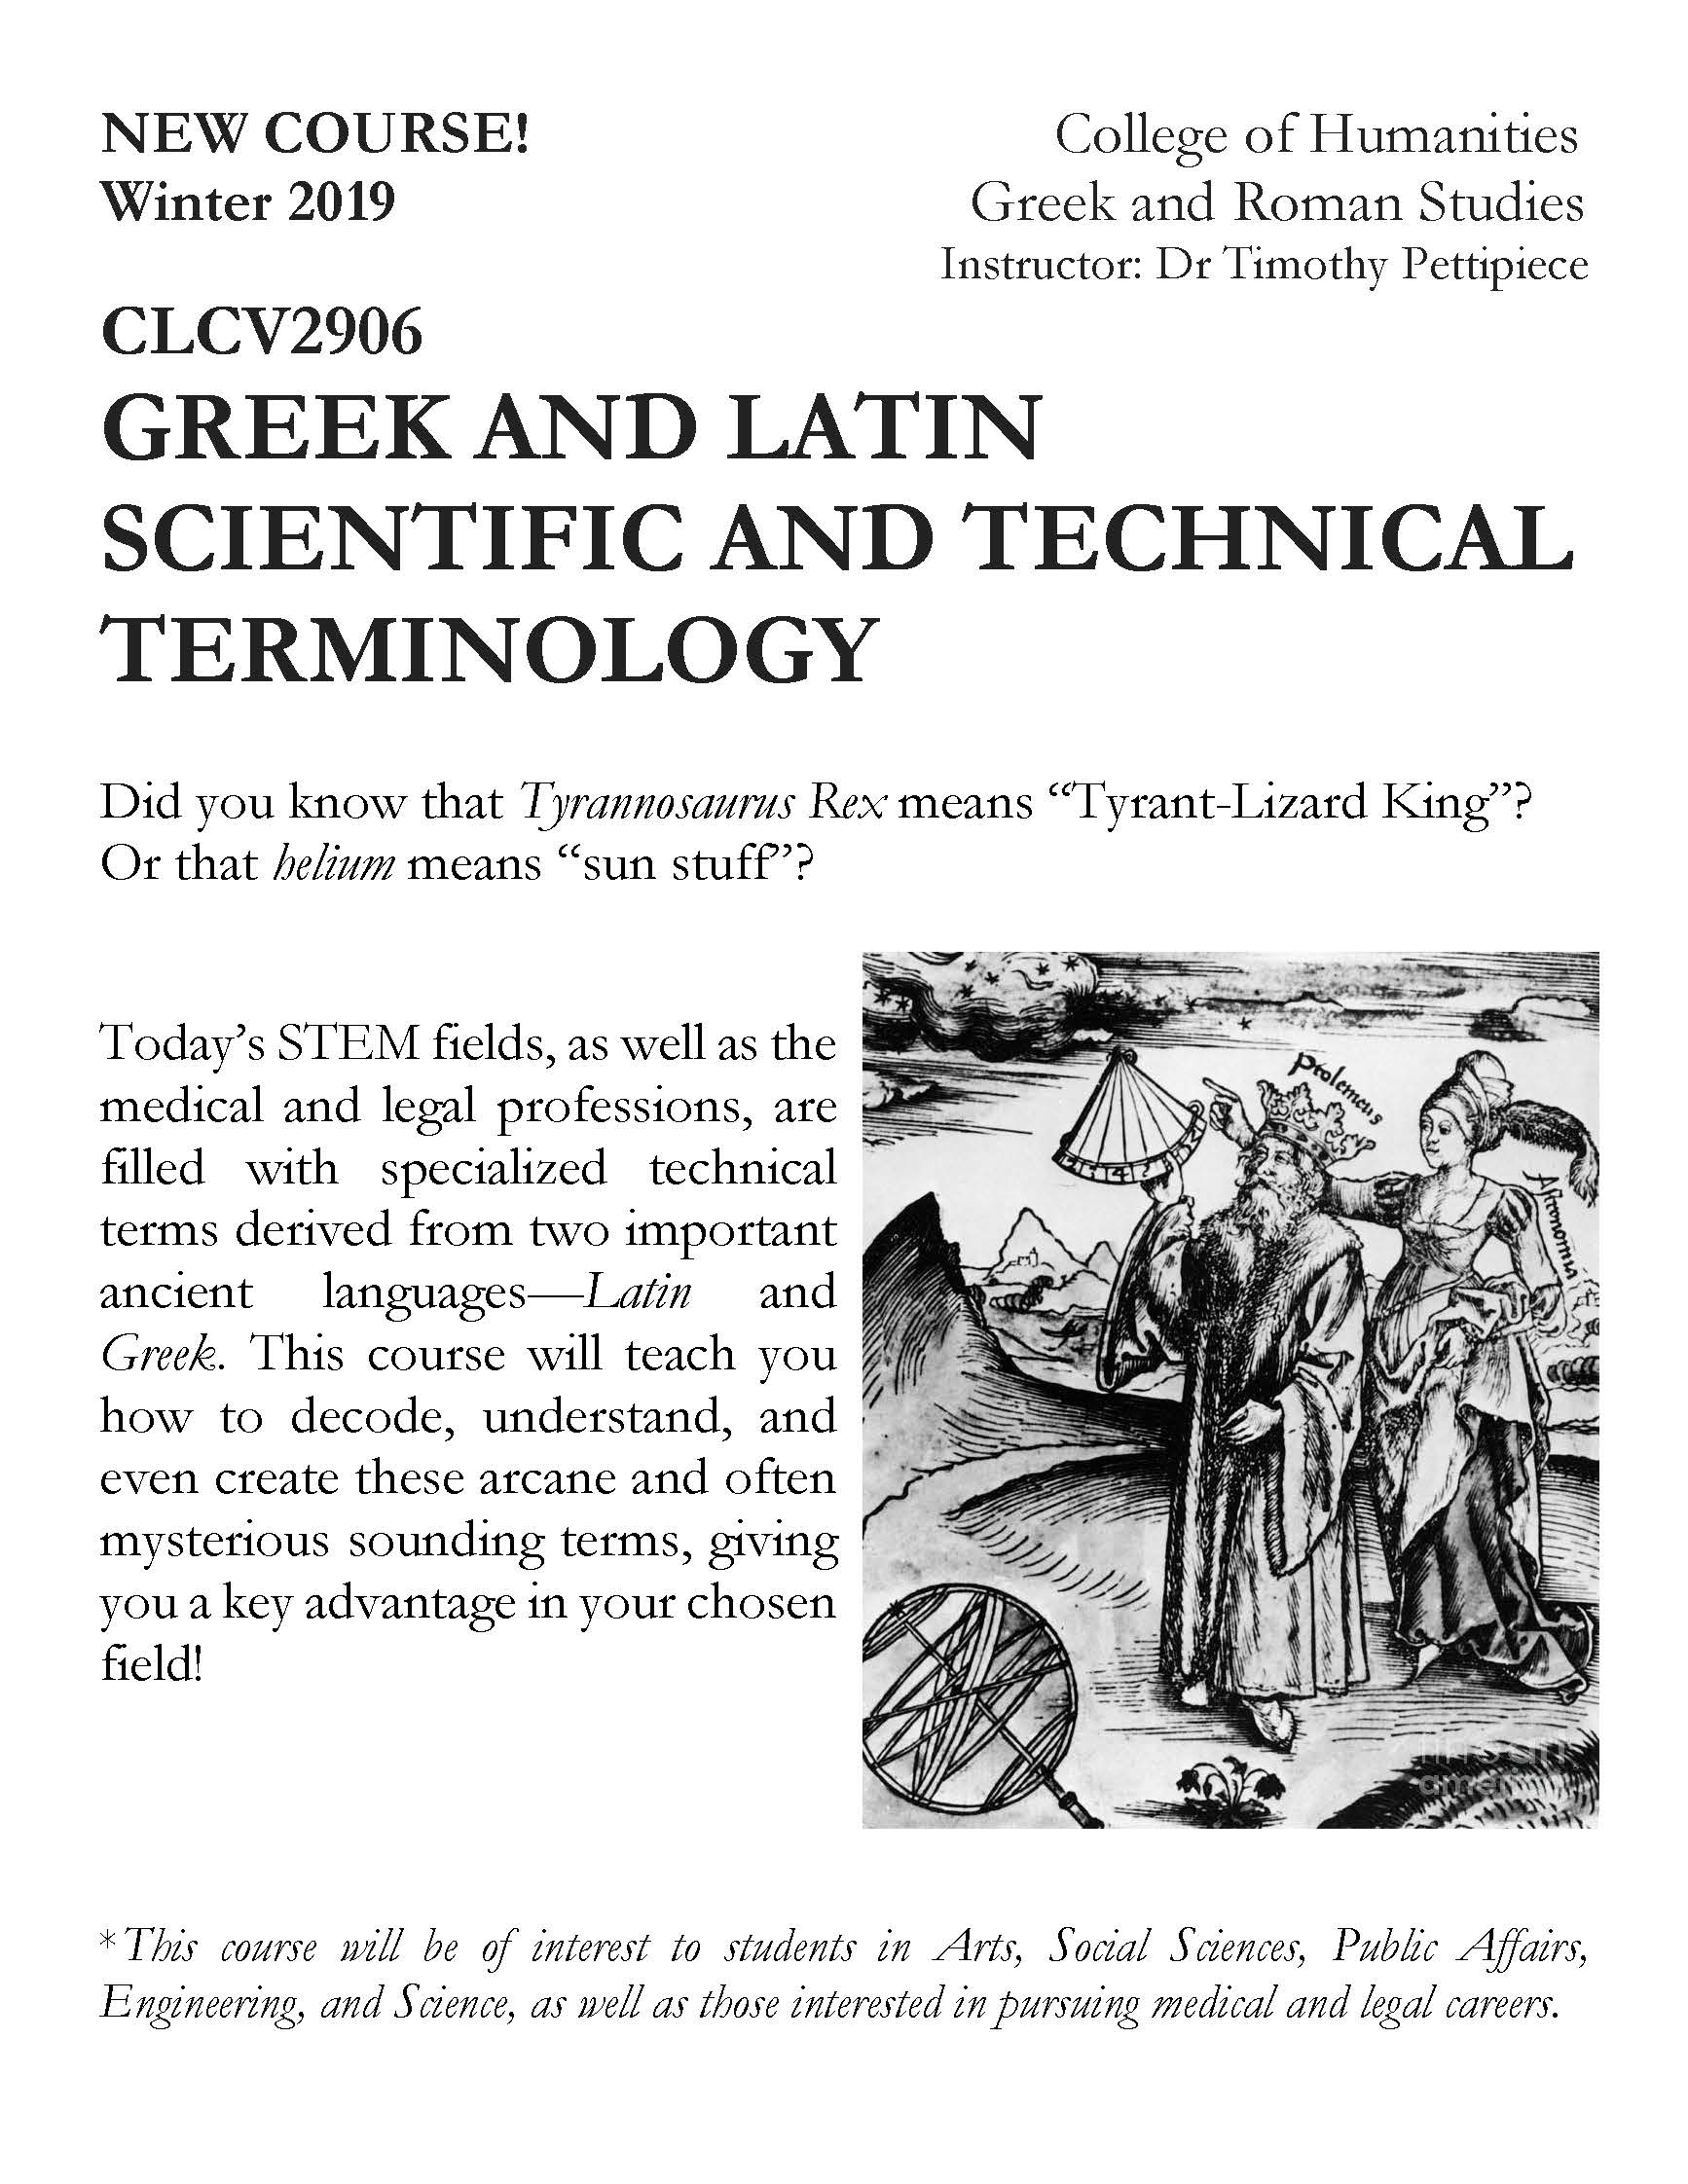 Greek and Latin in Scientific Terminology